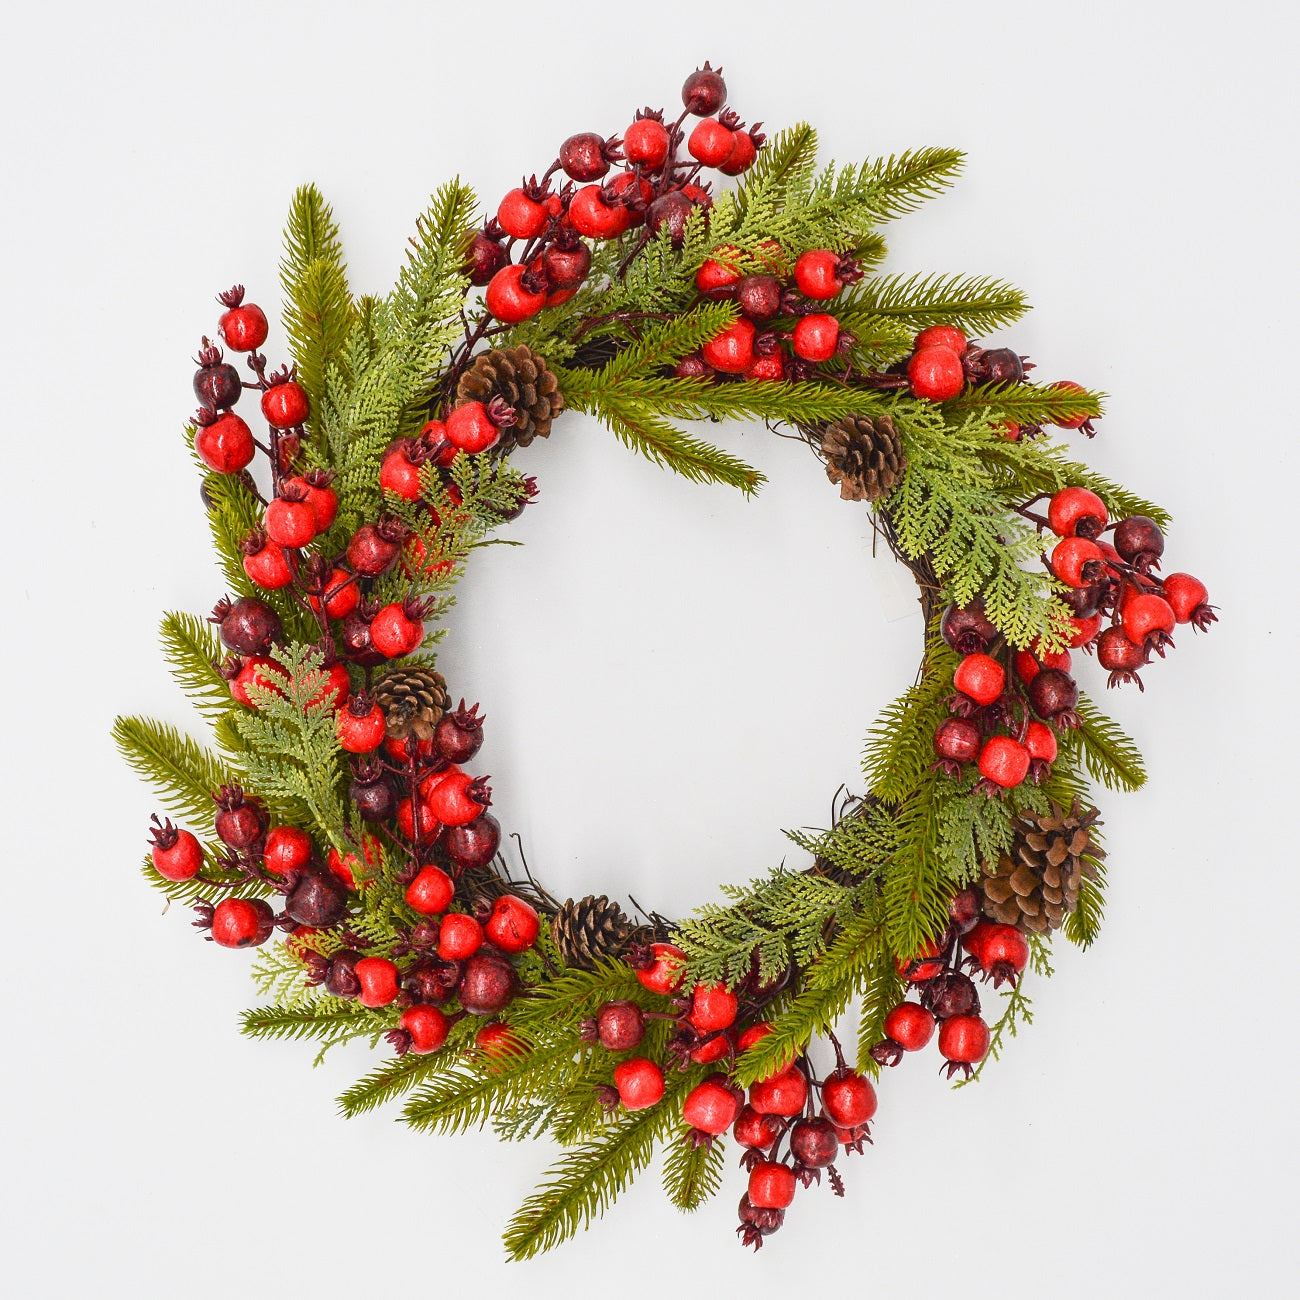 22" Mixed Evergreen Holiday wreath with Large Berries